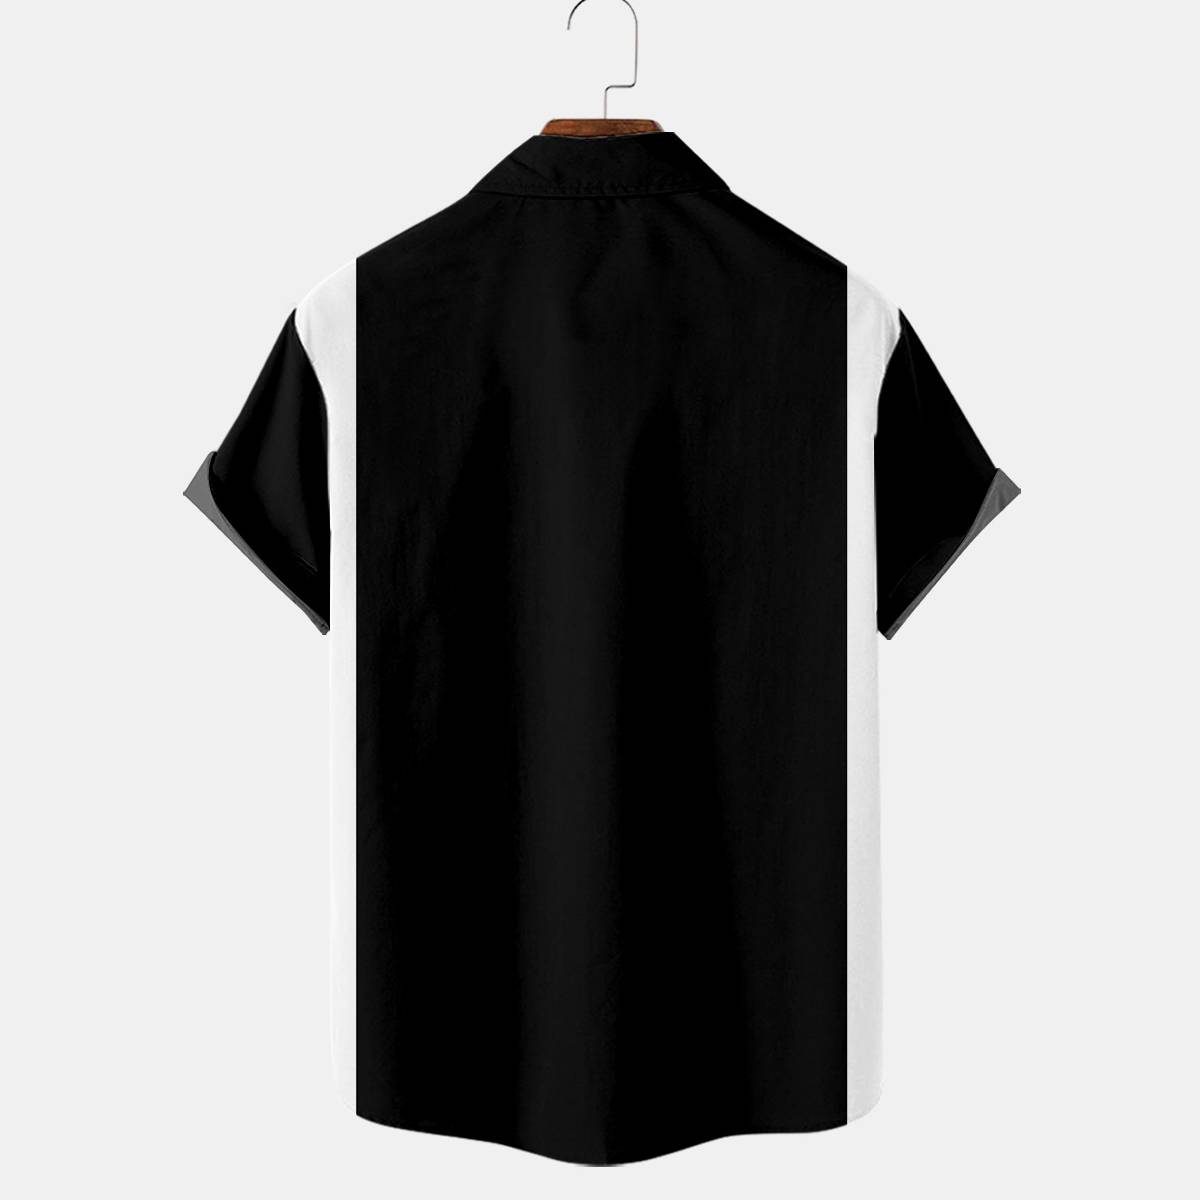 Classic Black and White Daily Shirt for Men